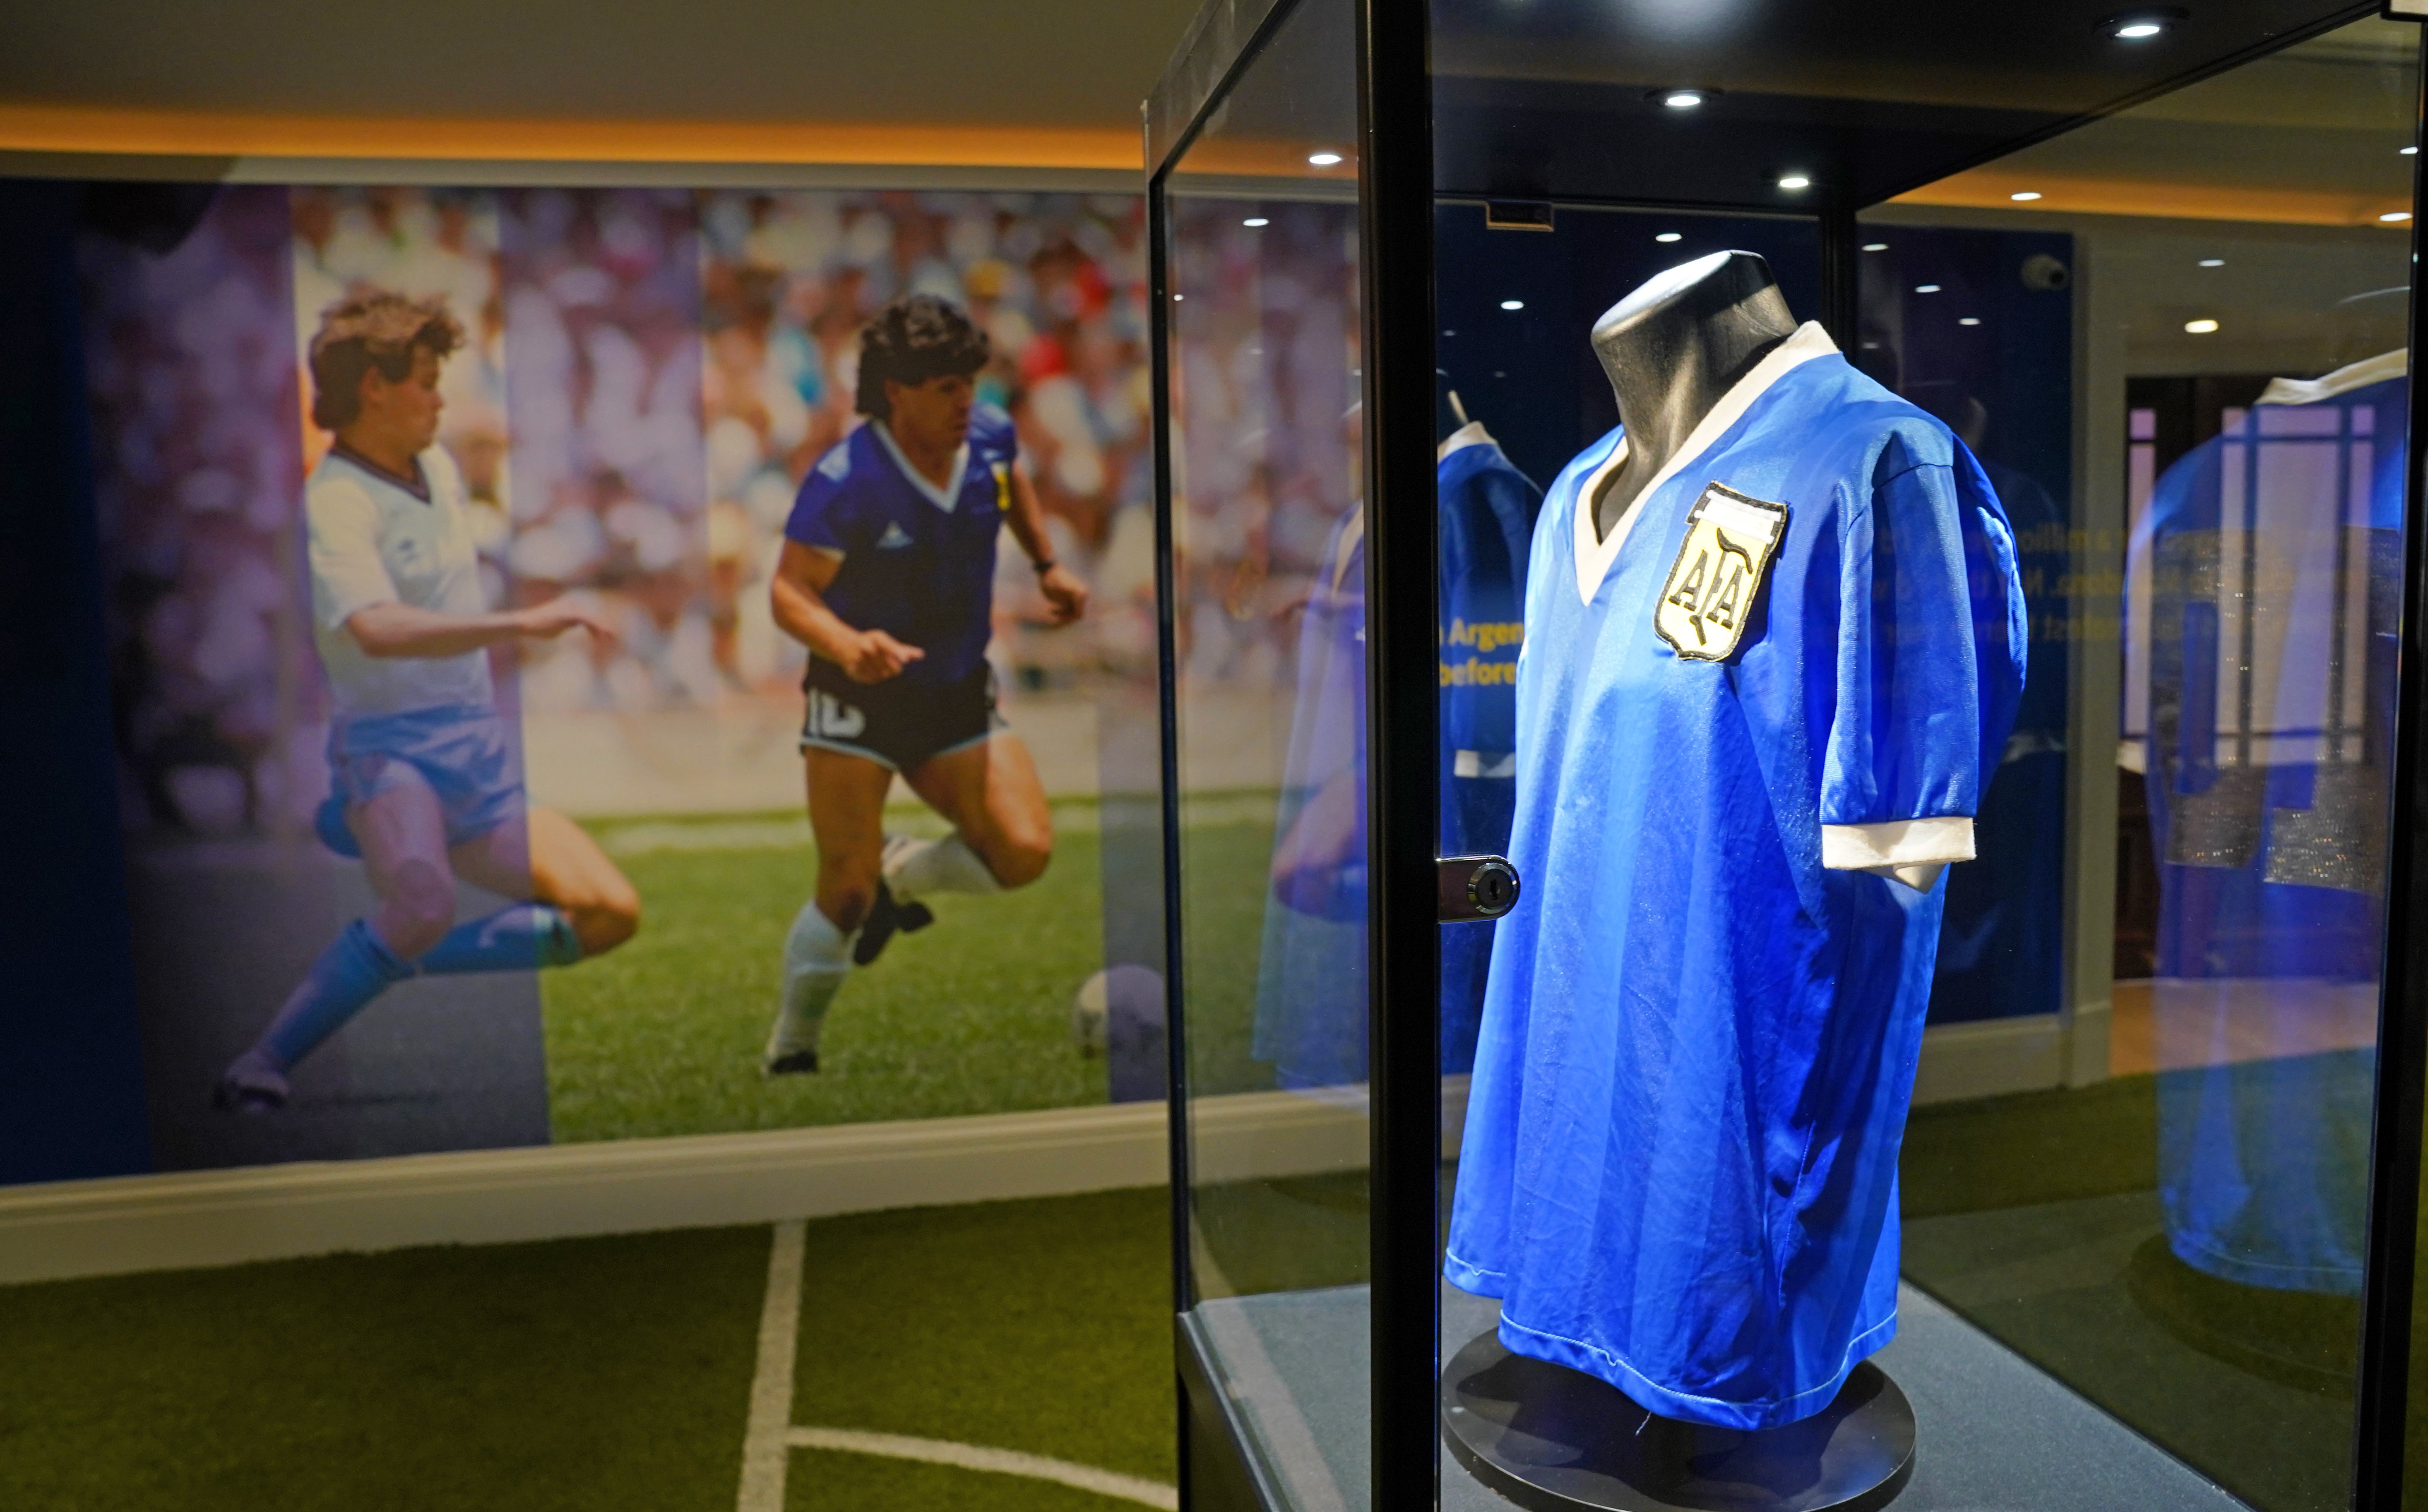 Diego Maradona’s 1986 World Cup ‘Hand of God’ shirt has fetched a record price at auction (Jonathan Brady/PA).